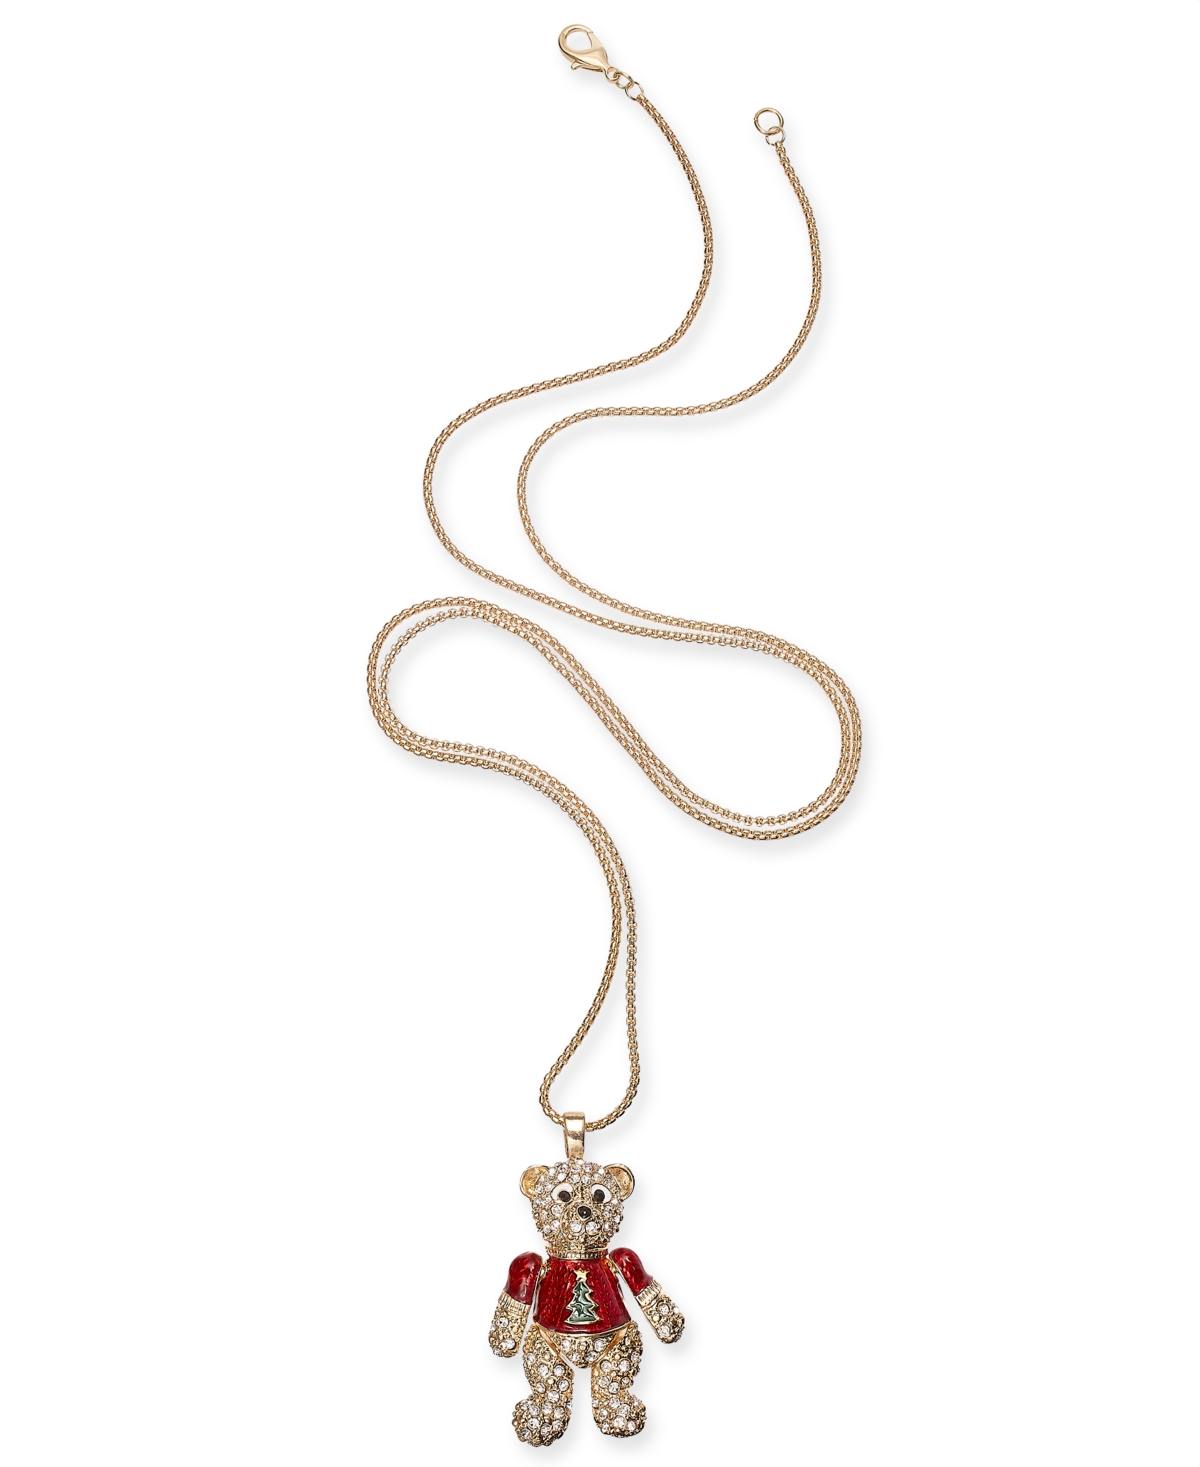 Gold-Tone Pave Teddy Bear 36" Pendant Necklace, Created for Macy's - Gold